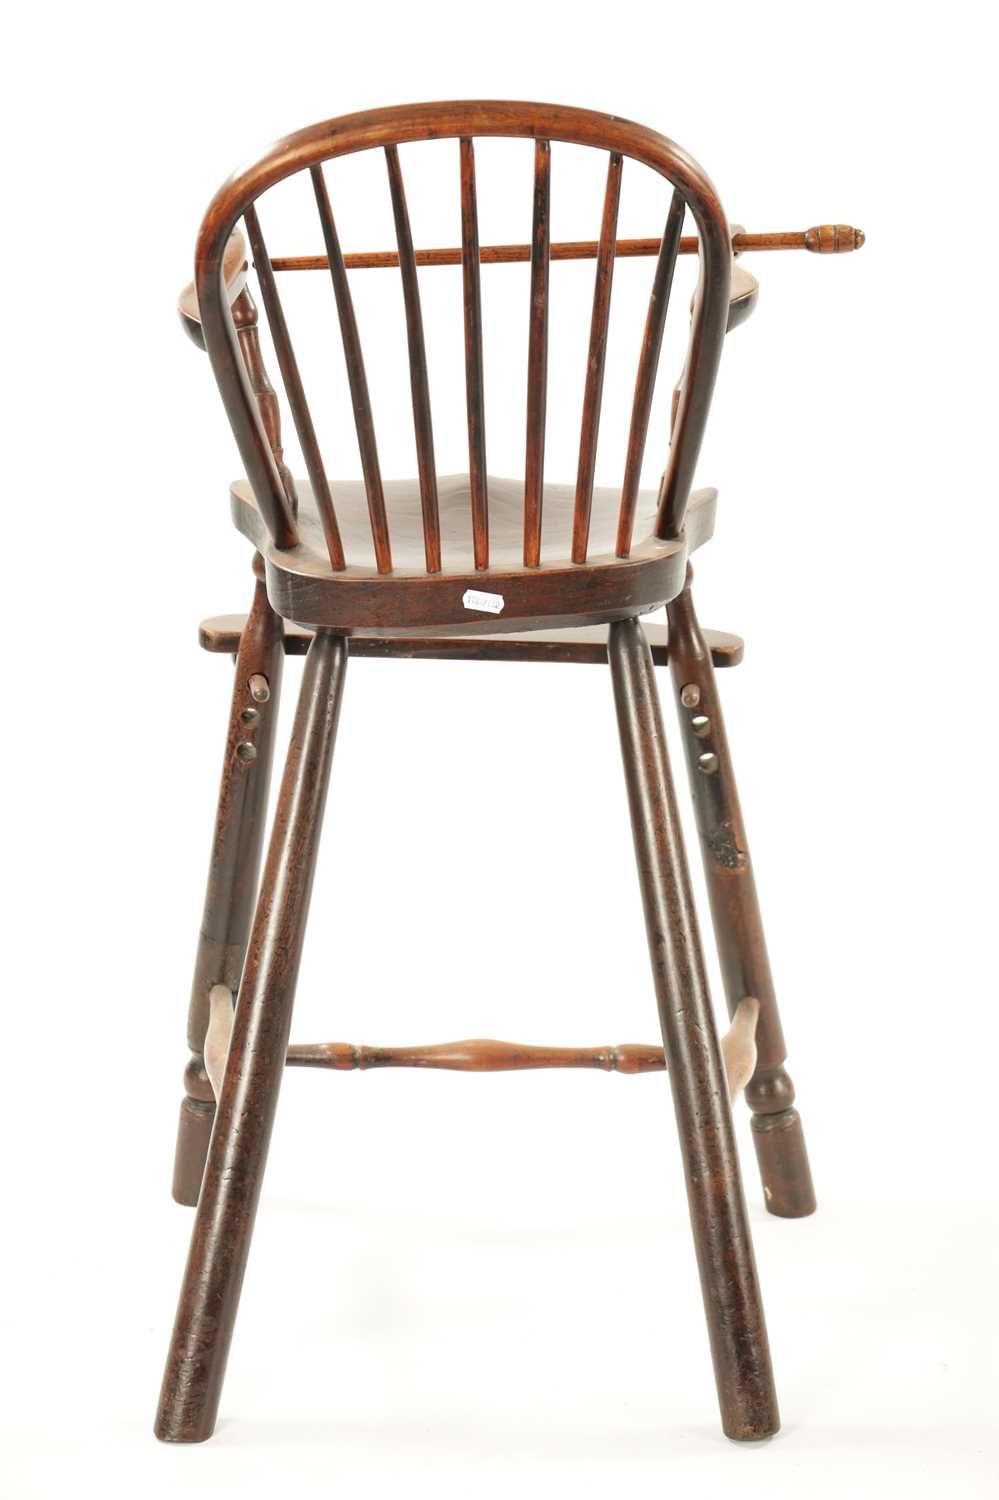 A 19TH CENTURY FRUITWOOD CHILDREN’S SPINDLE BACK HIGH CHAIR - Image 7 of 7